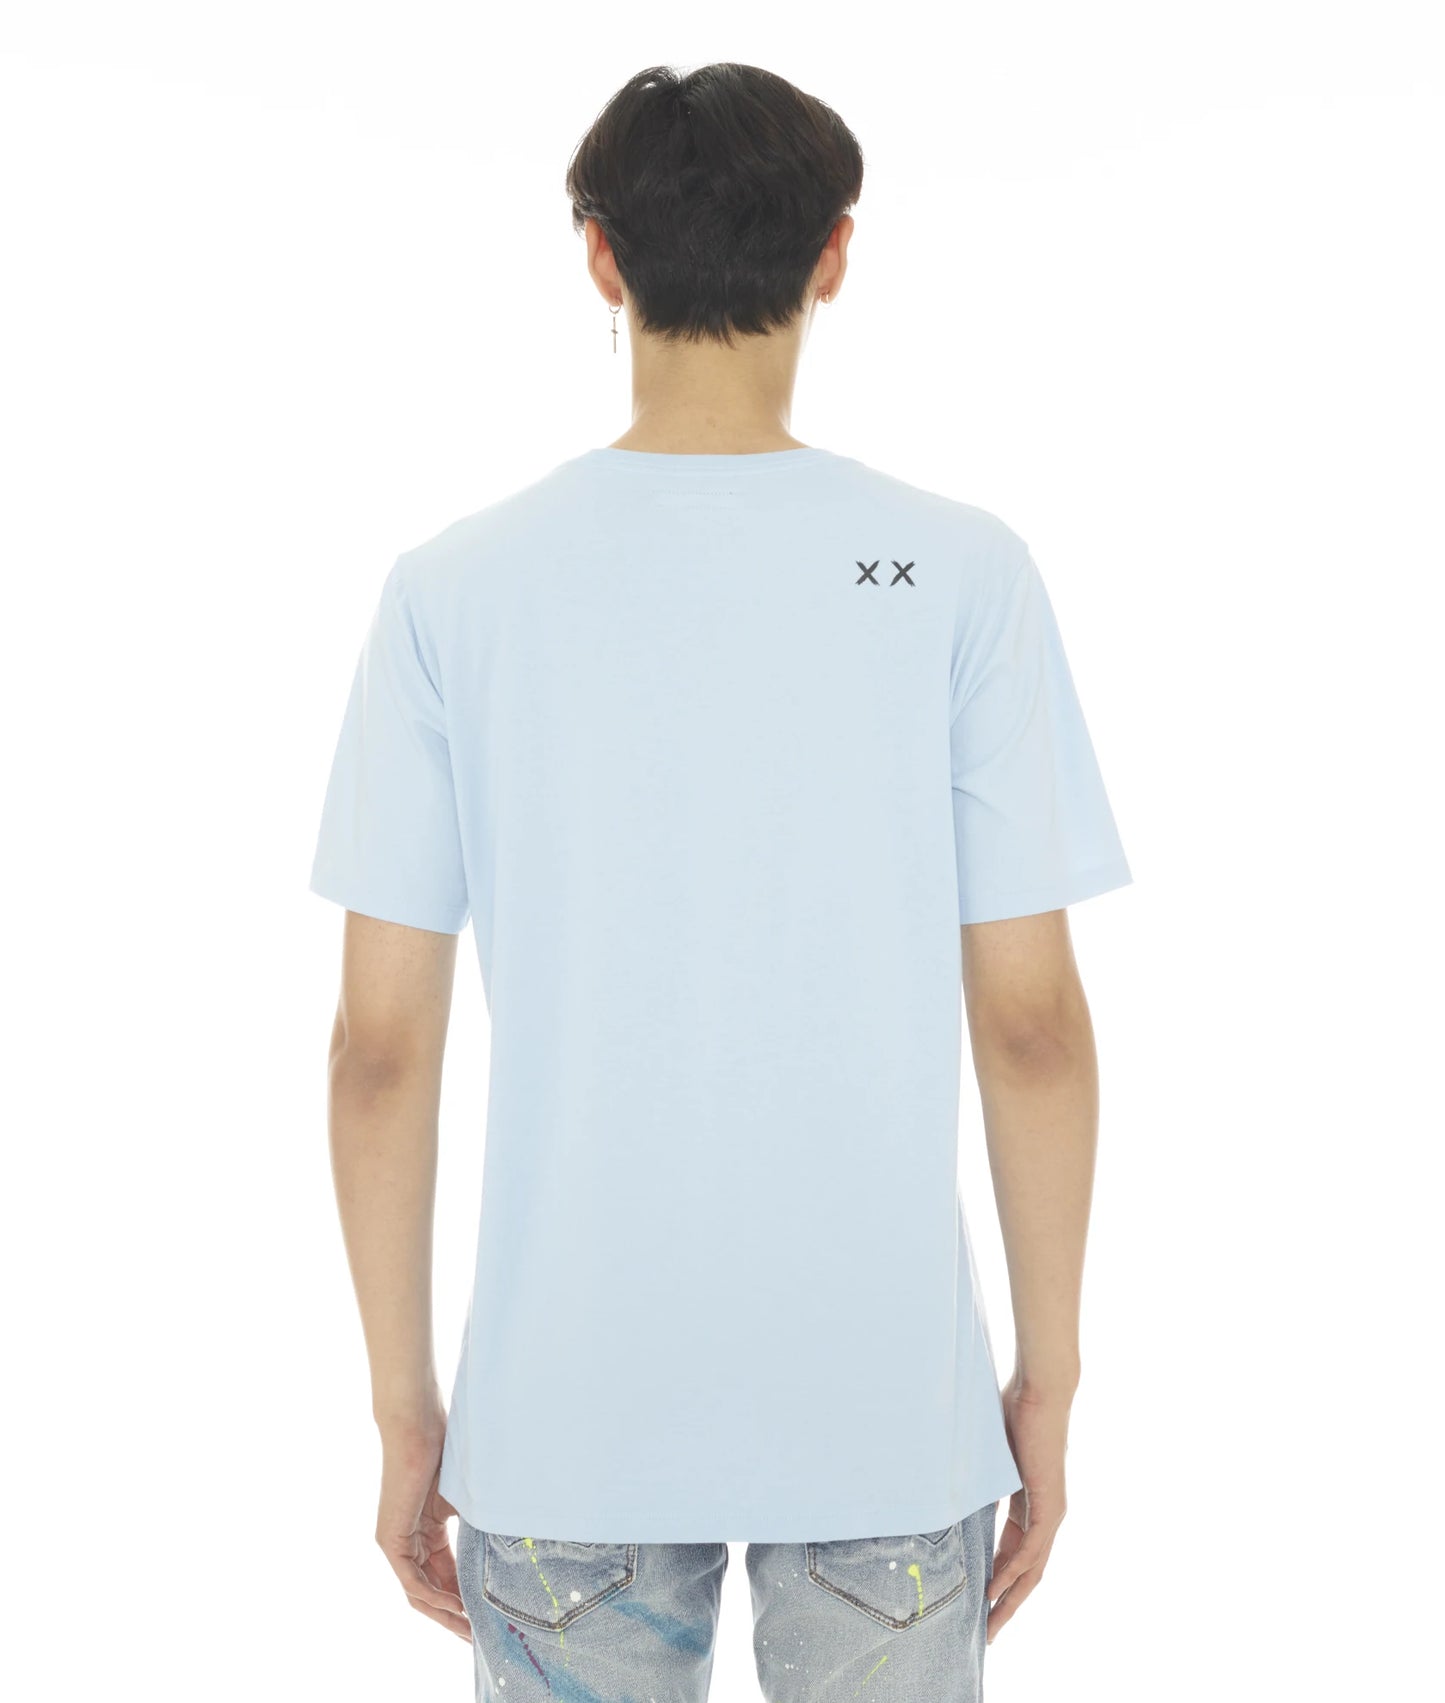 SHORT SLEEVE CREW NECK TEE "NO1 CARES" IN BABY BLUE